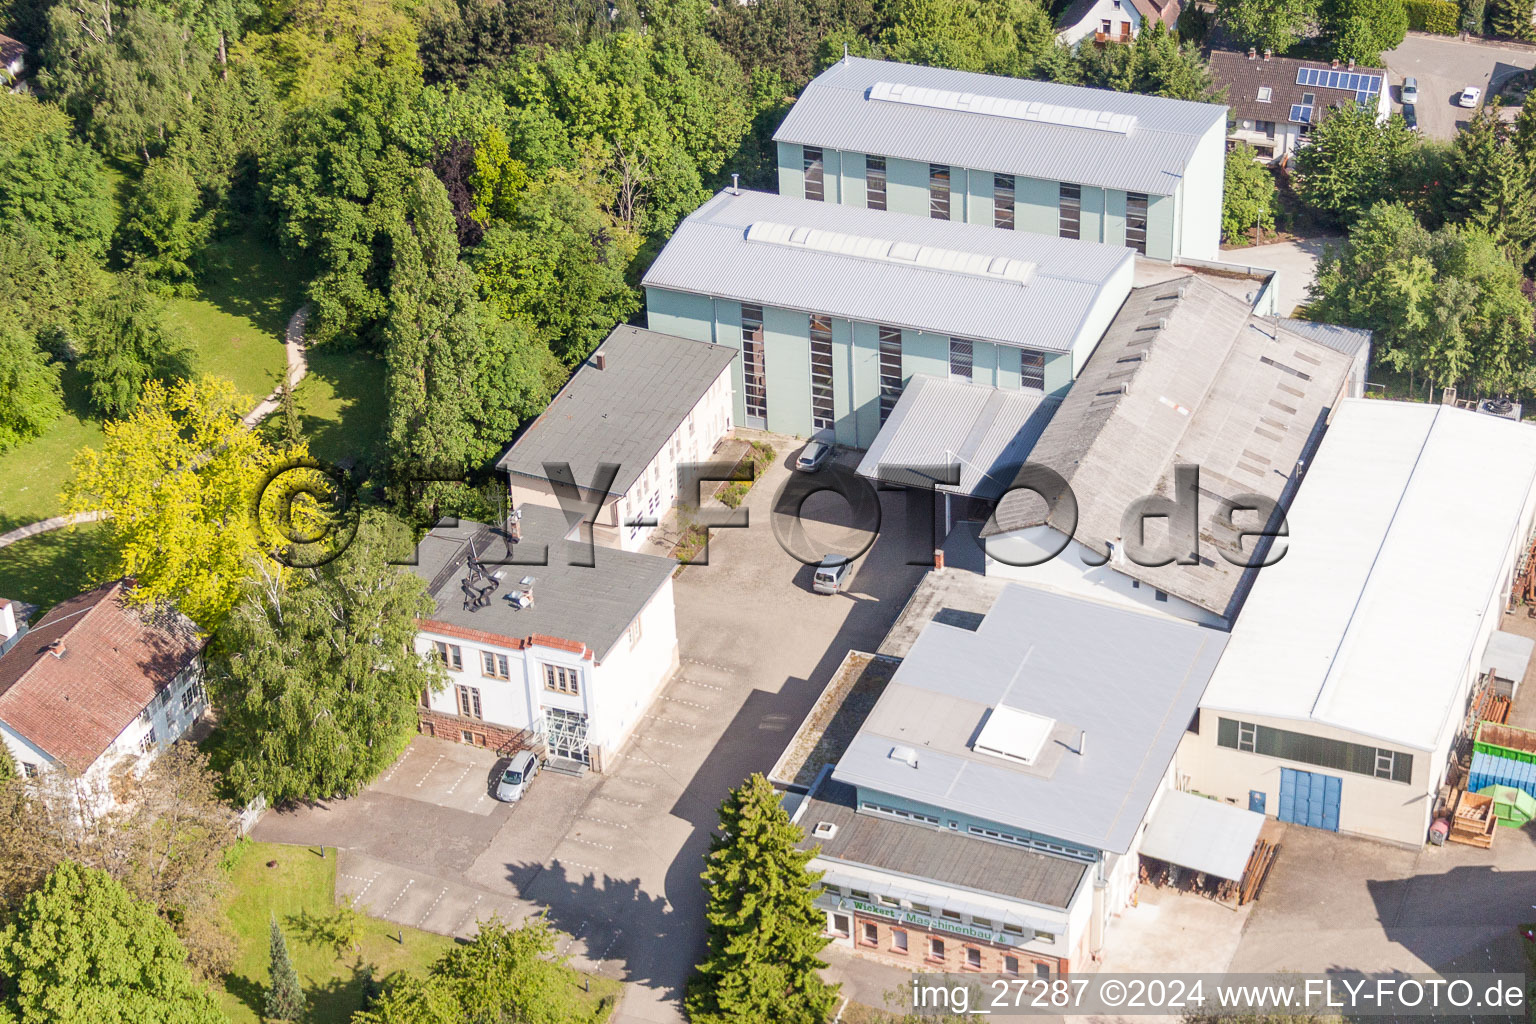 Aerial view of Building and production halls on the premises of Wickert Maschinenbau GmbH in Landau in der Pfalz in the state Rhineland-Palatinate, Germany